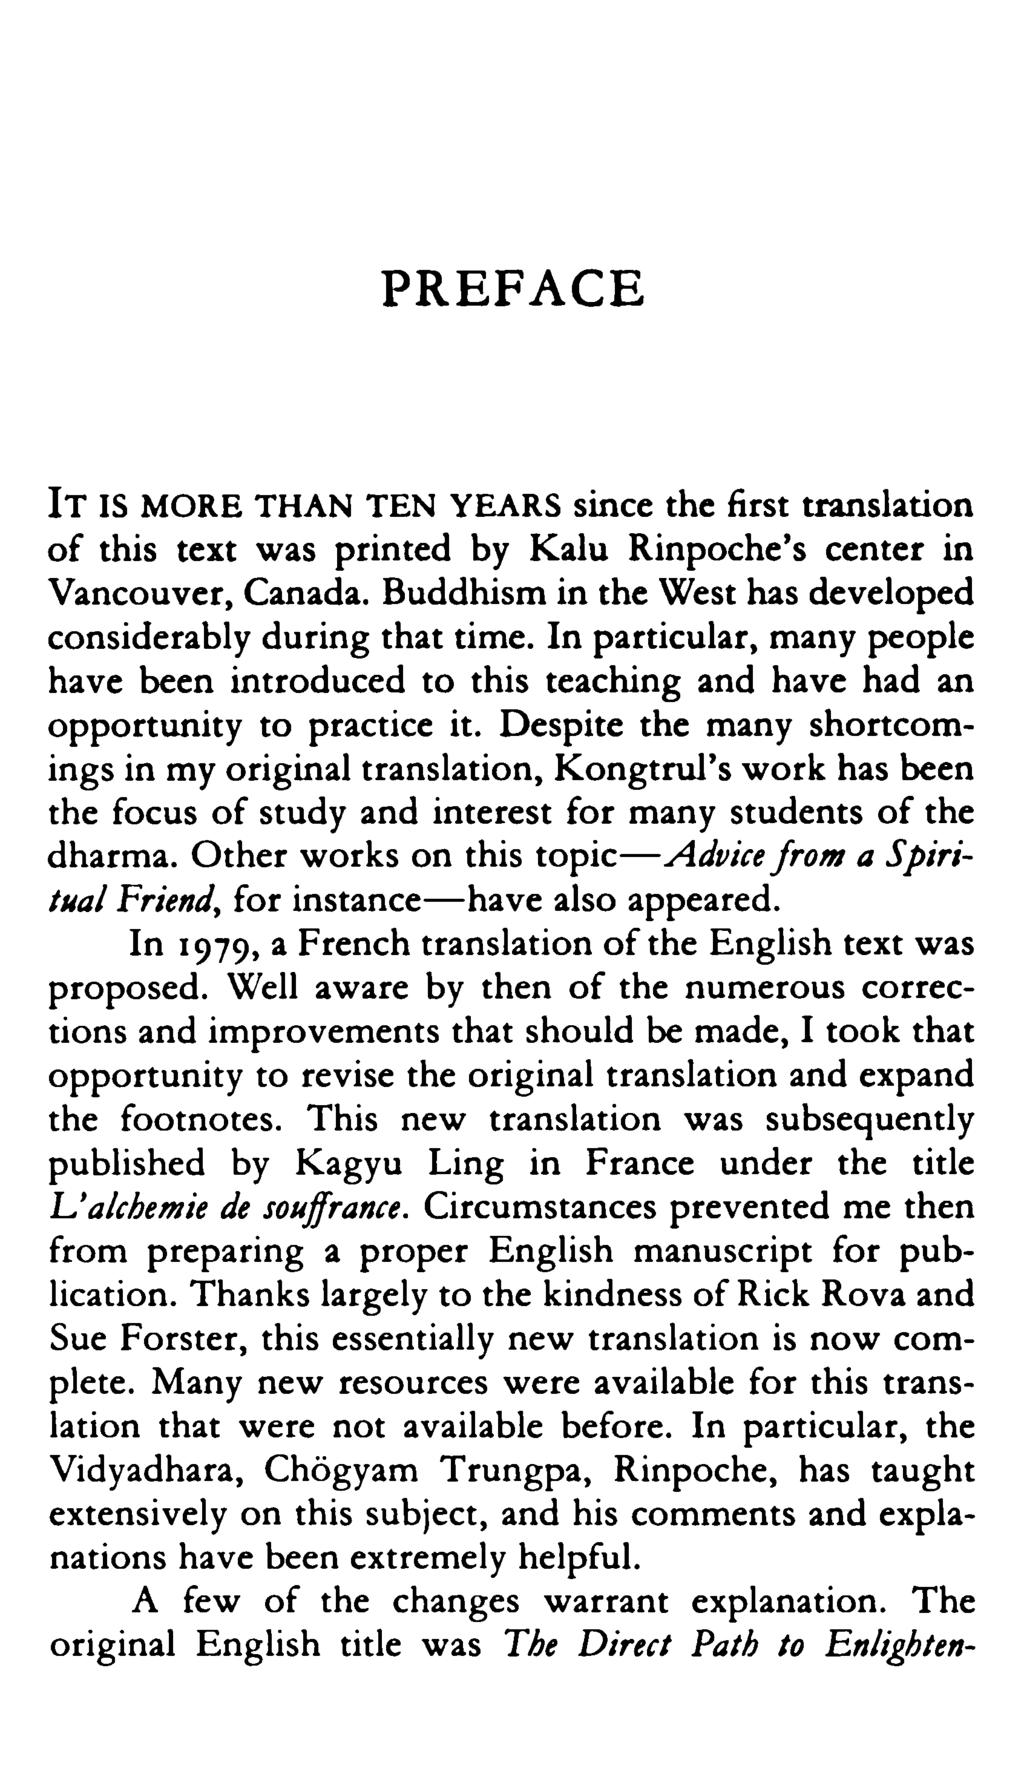 PREFACE IT IS MORE THAN TEN YEARS since the first translation of this text was printed by Kalu Rinpoche's center in Vancouver, Canada. Buddhism in the West has developed considerably during that time.